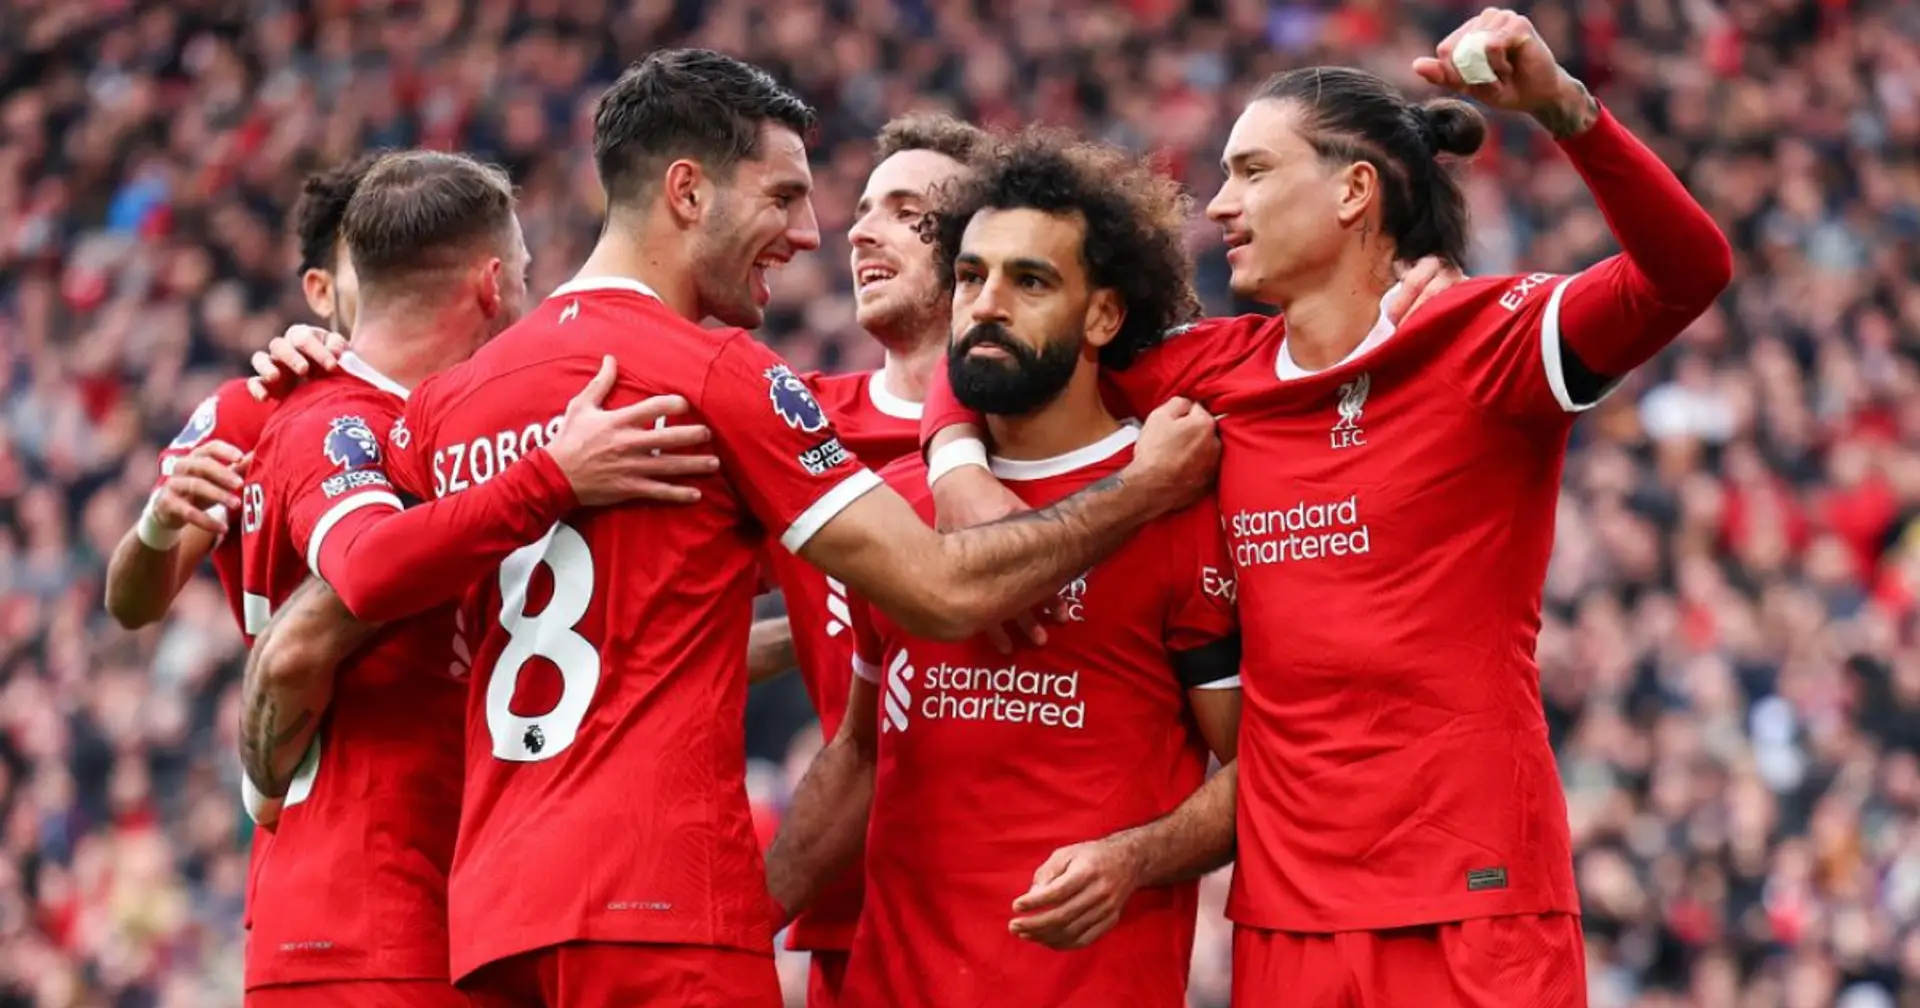 Liverpool defeat Everton and 2 more big stories you might've missed